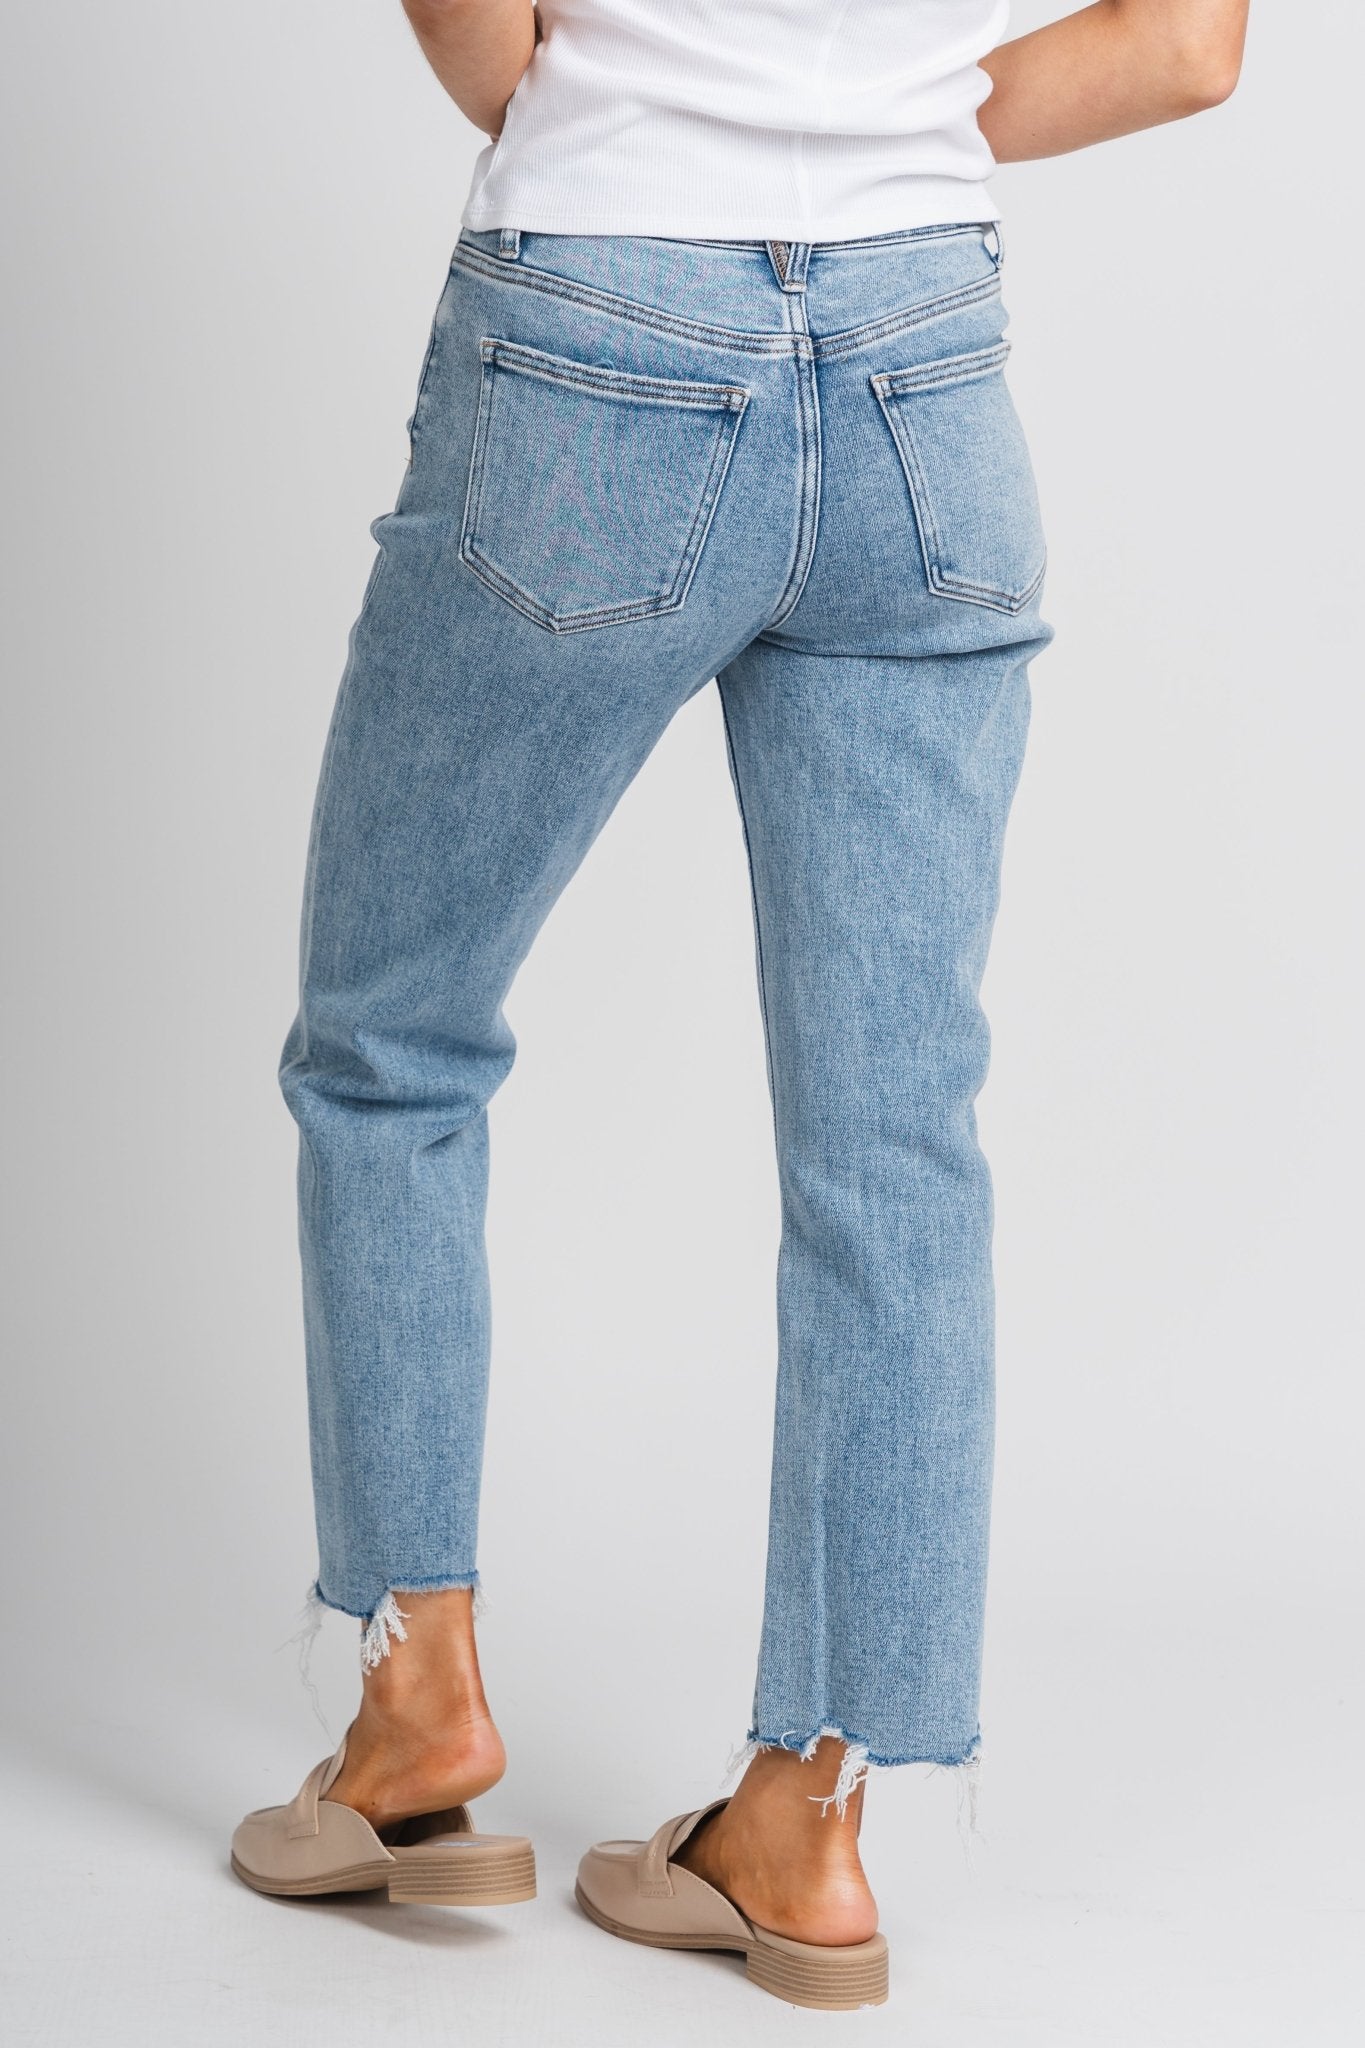 Flying Monkey cropped straight jeans ergonomical | Lush Fashion Lounge: boutique women's jeans, fashion jeans for women, affordable fashion jeans, cute boutique jeans